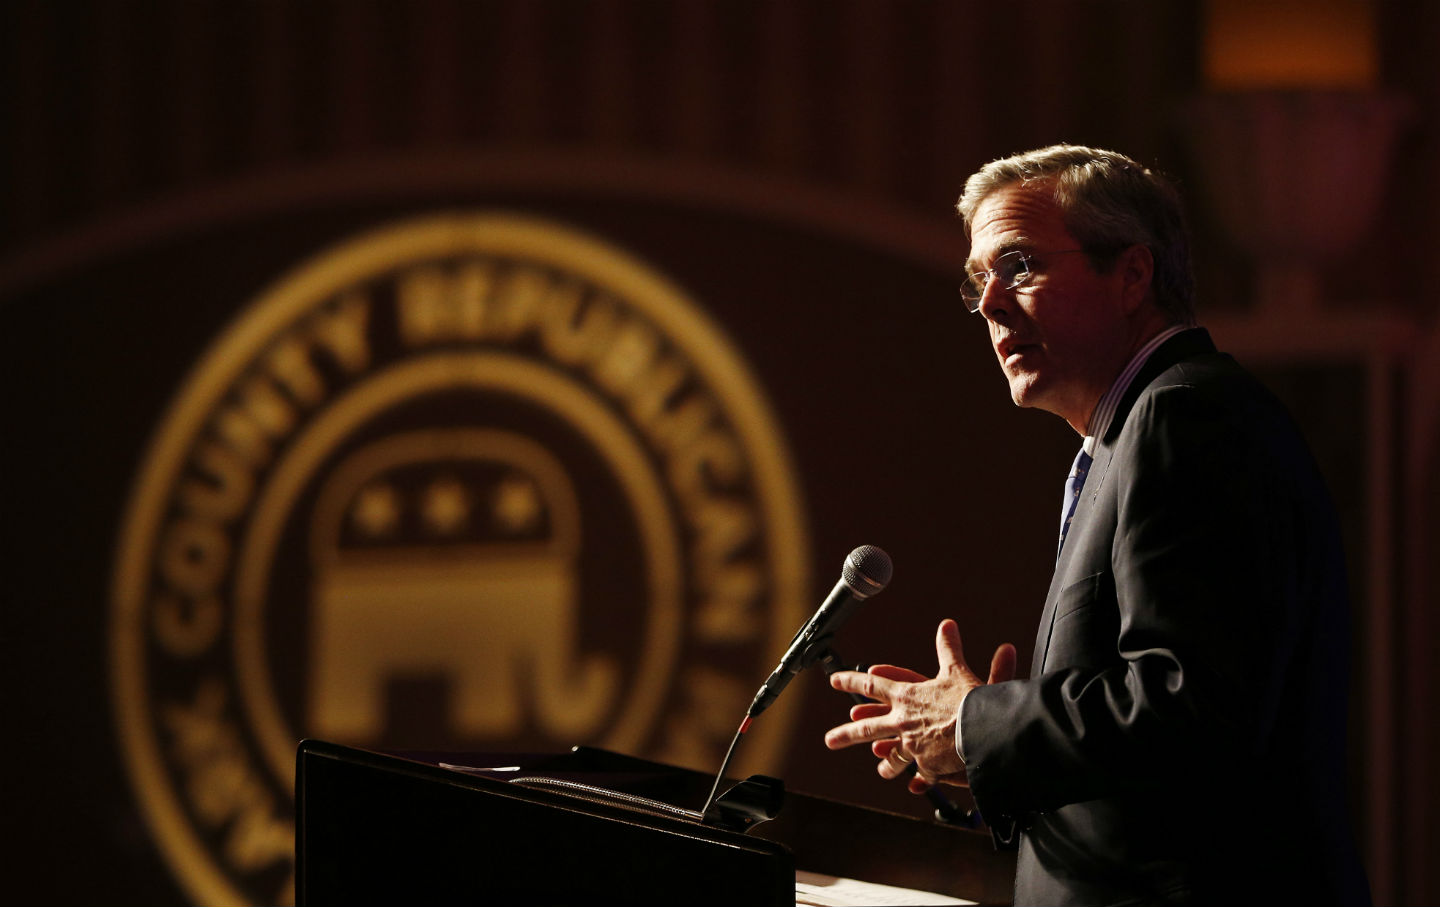 Will Jeb Bush Get Away With His ‘Scheme’ to Skirt Campaign Finance Rules?